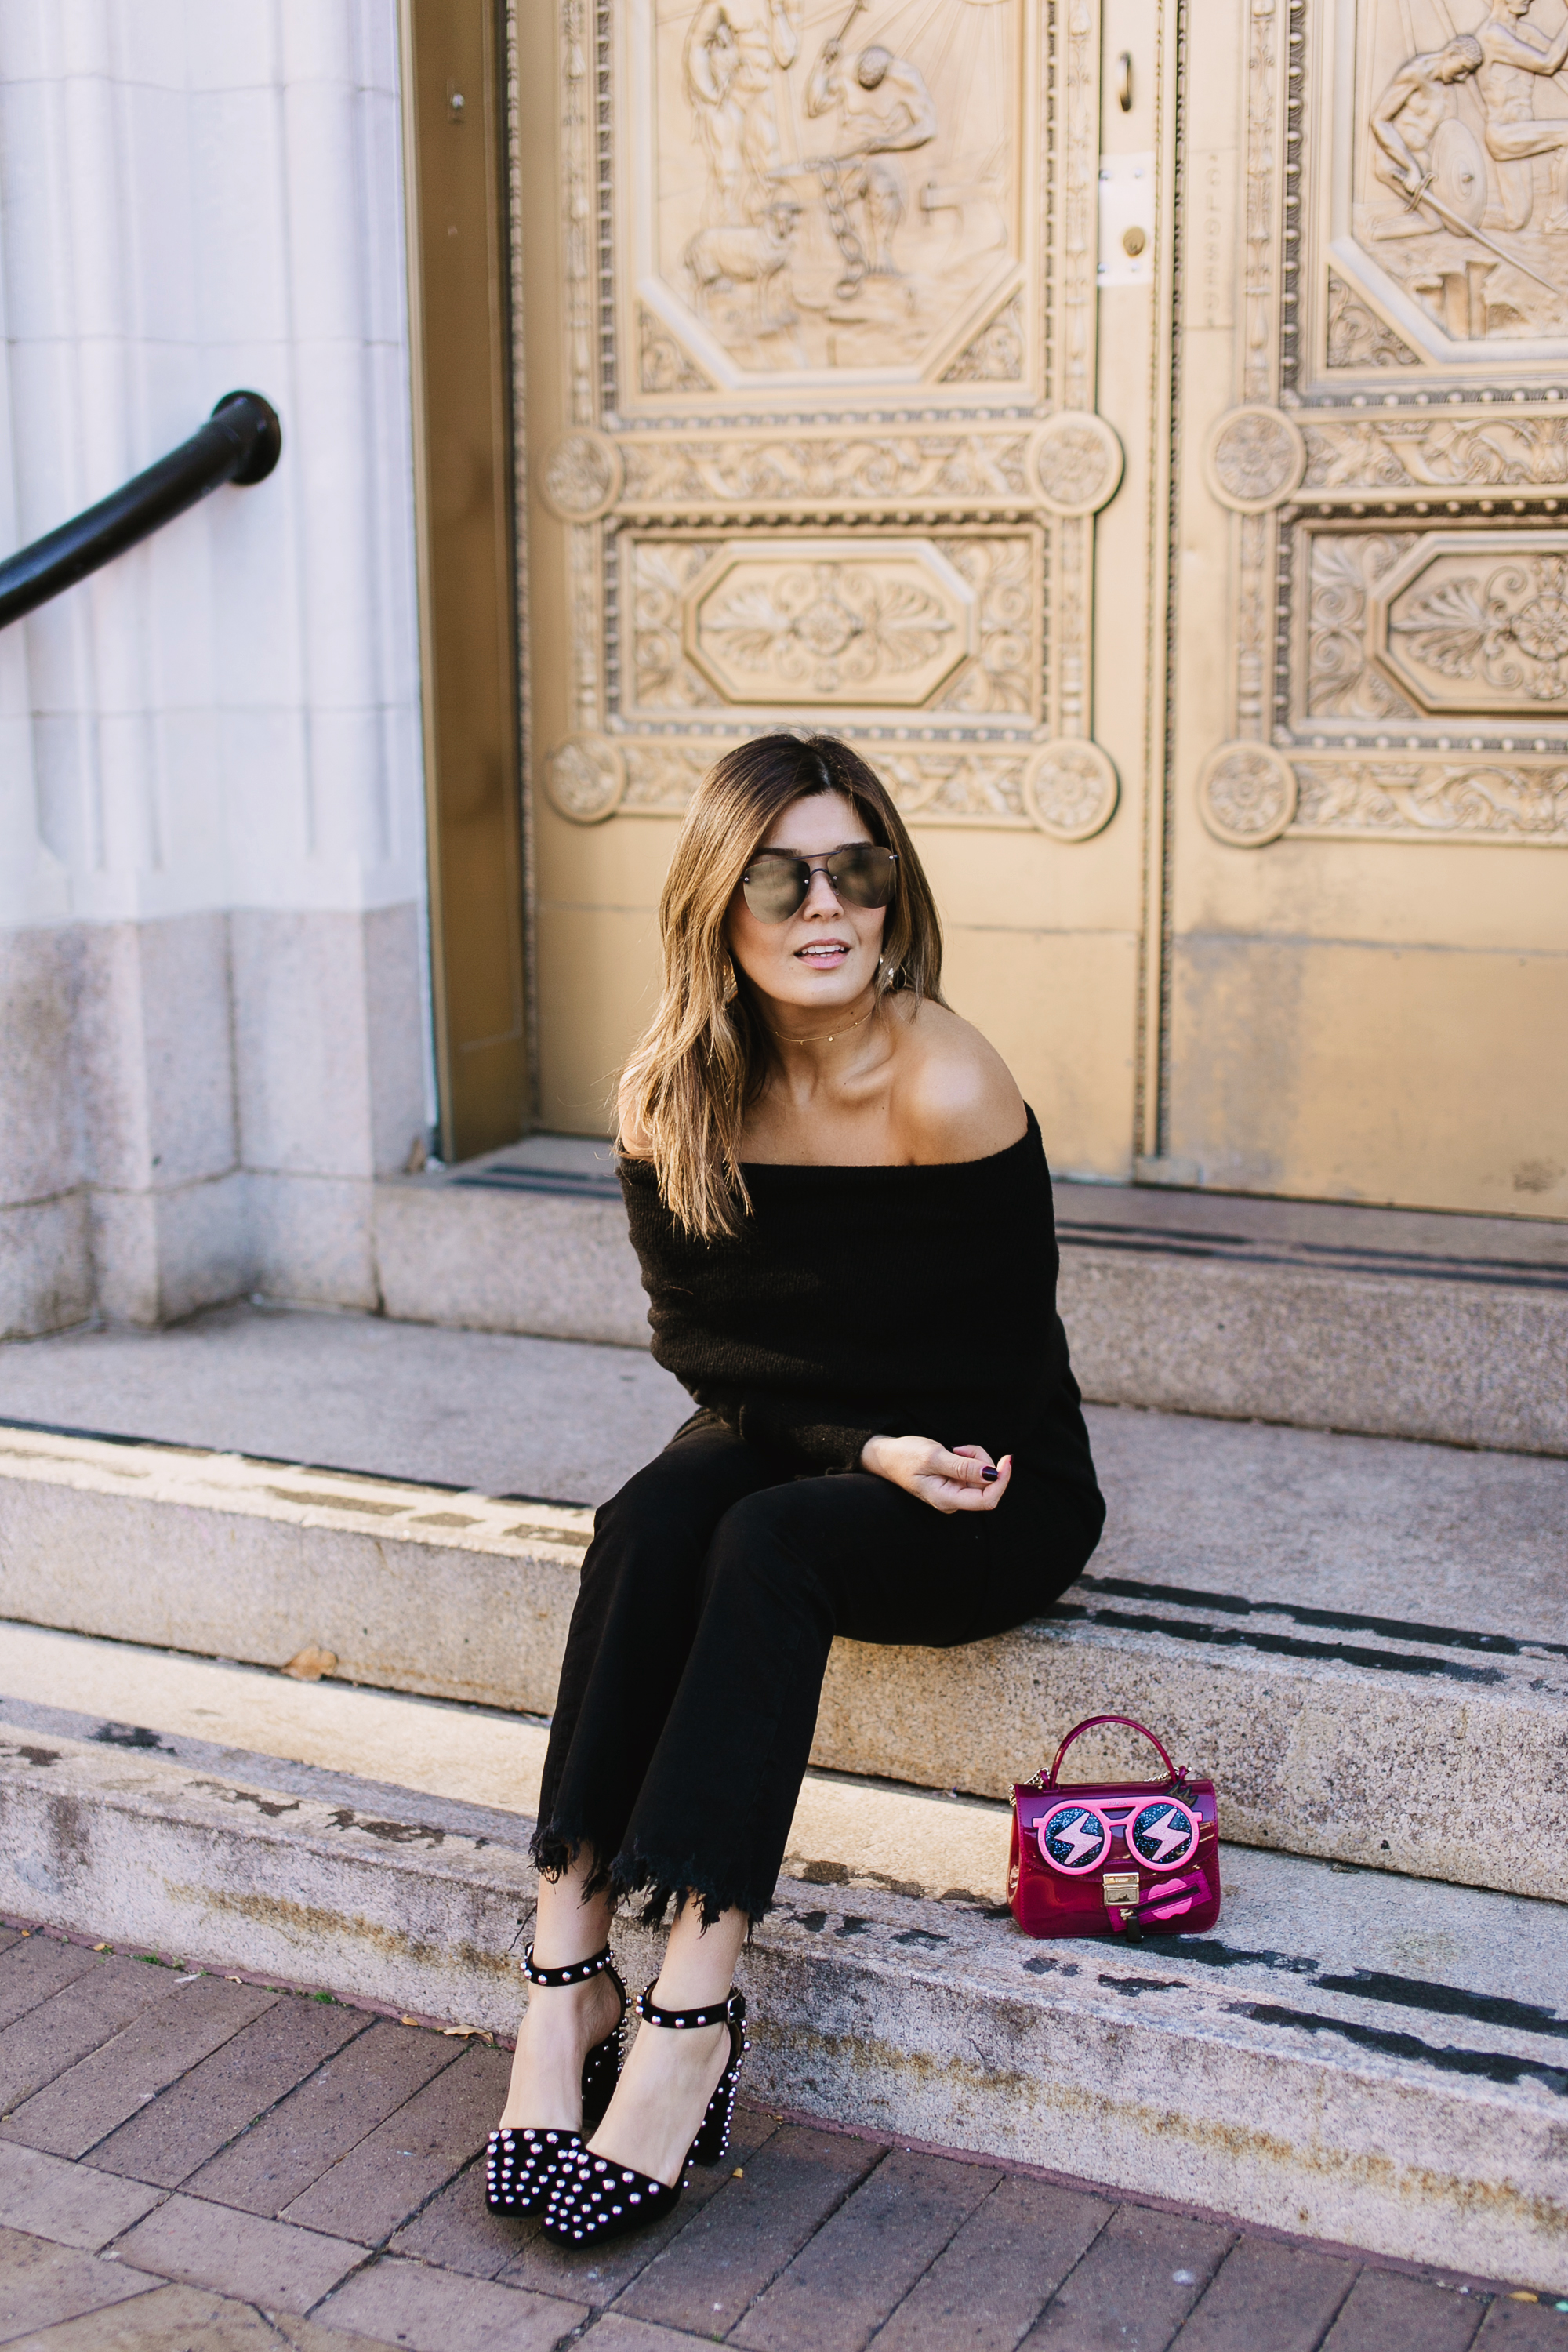 Blogger Sara Azani of Style MBA wears Alexander Wang Elise studded suede heels, KENDALL + KYLIE Fuzzy Knit Tunic, Gorjana 5 Disc Choker Necklace, Le Specs "The Prince" Sunglasses.